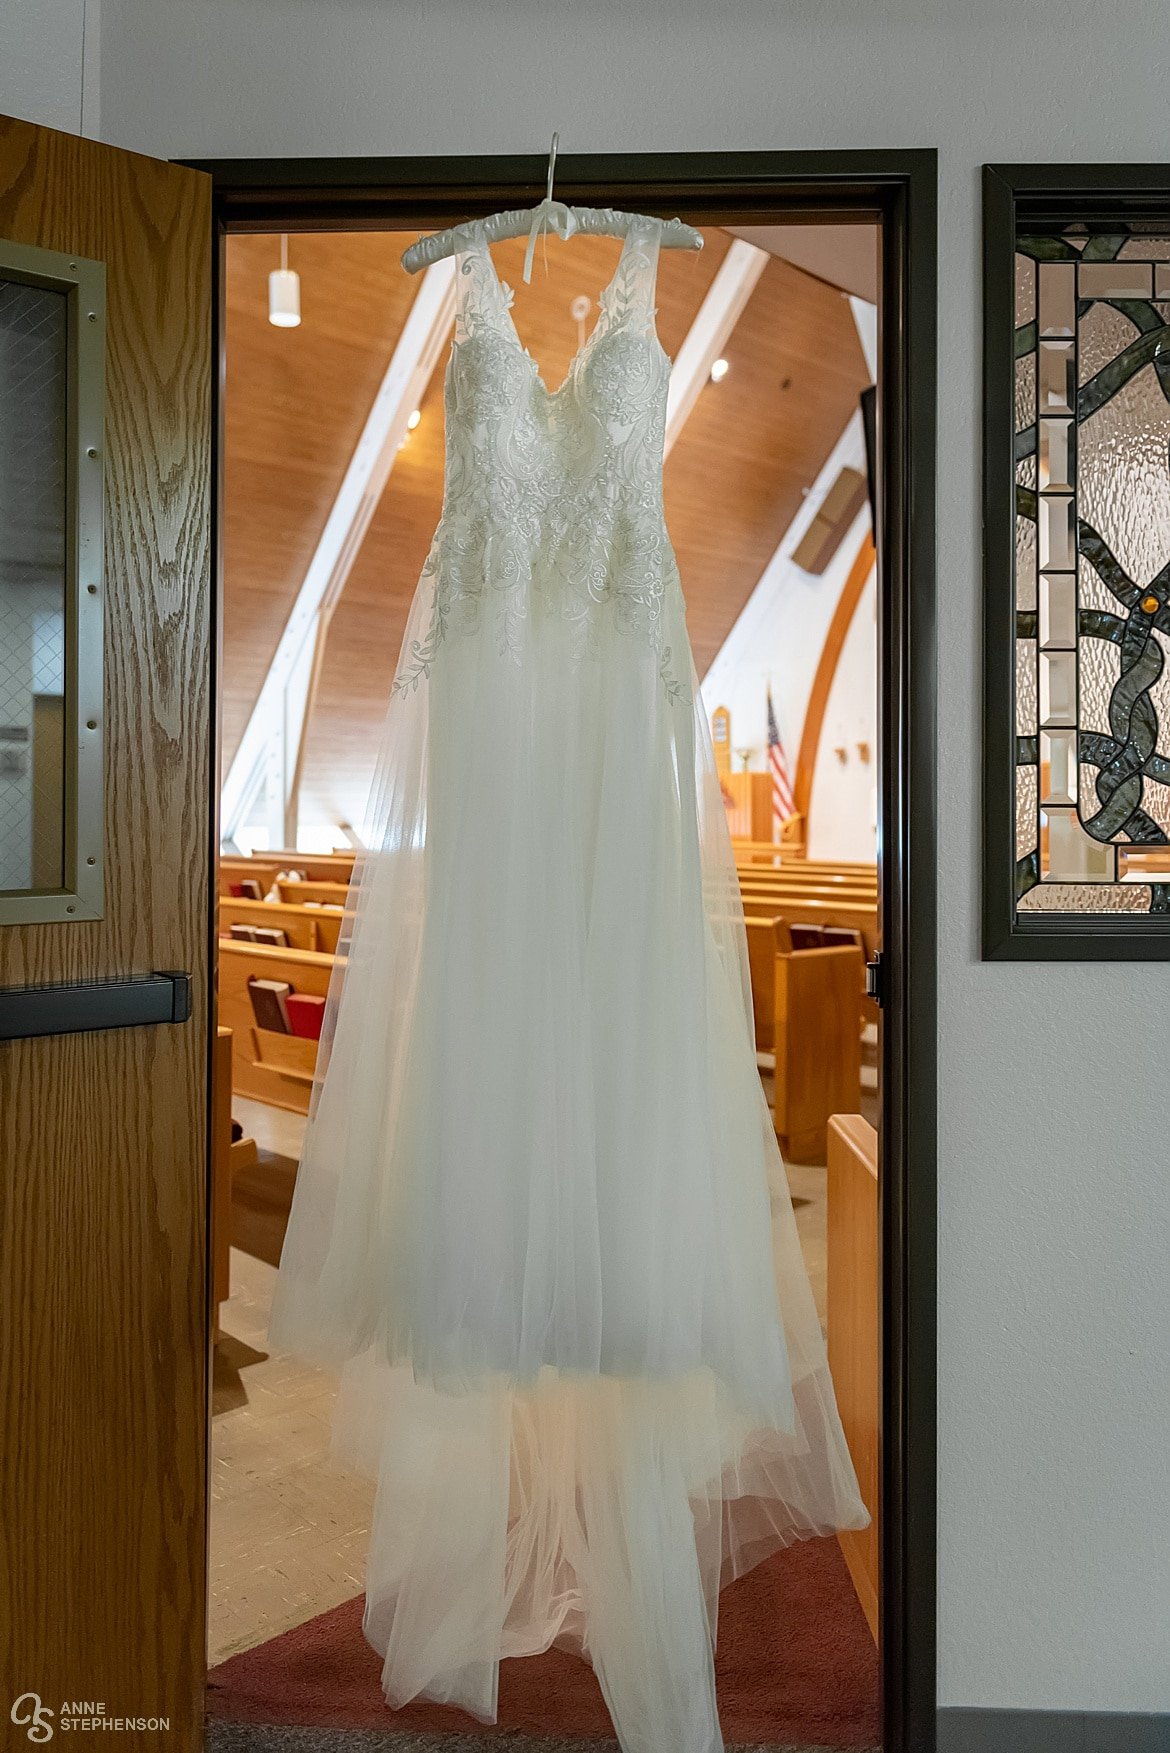 The bride's dress framed by the doorway into the church.